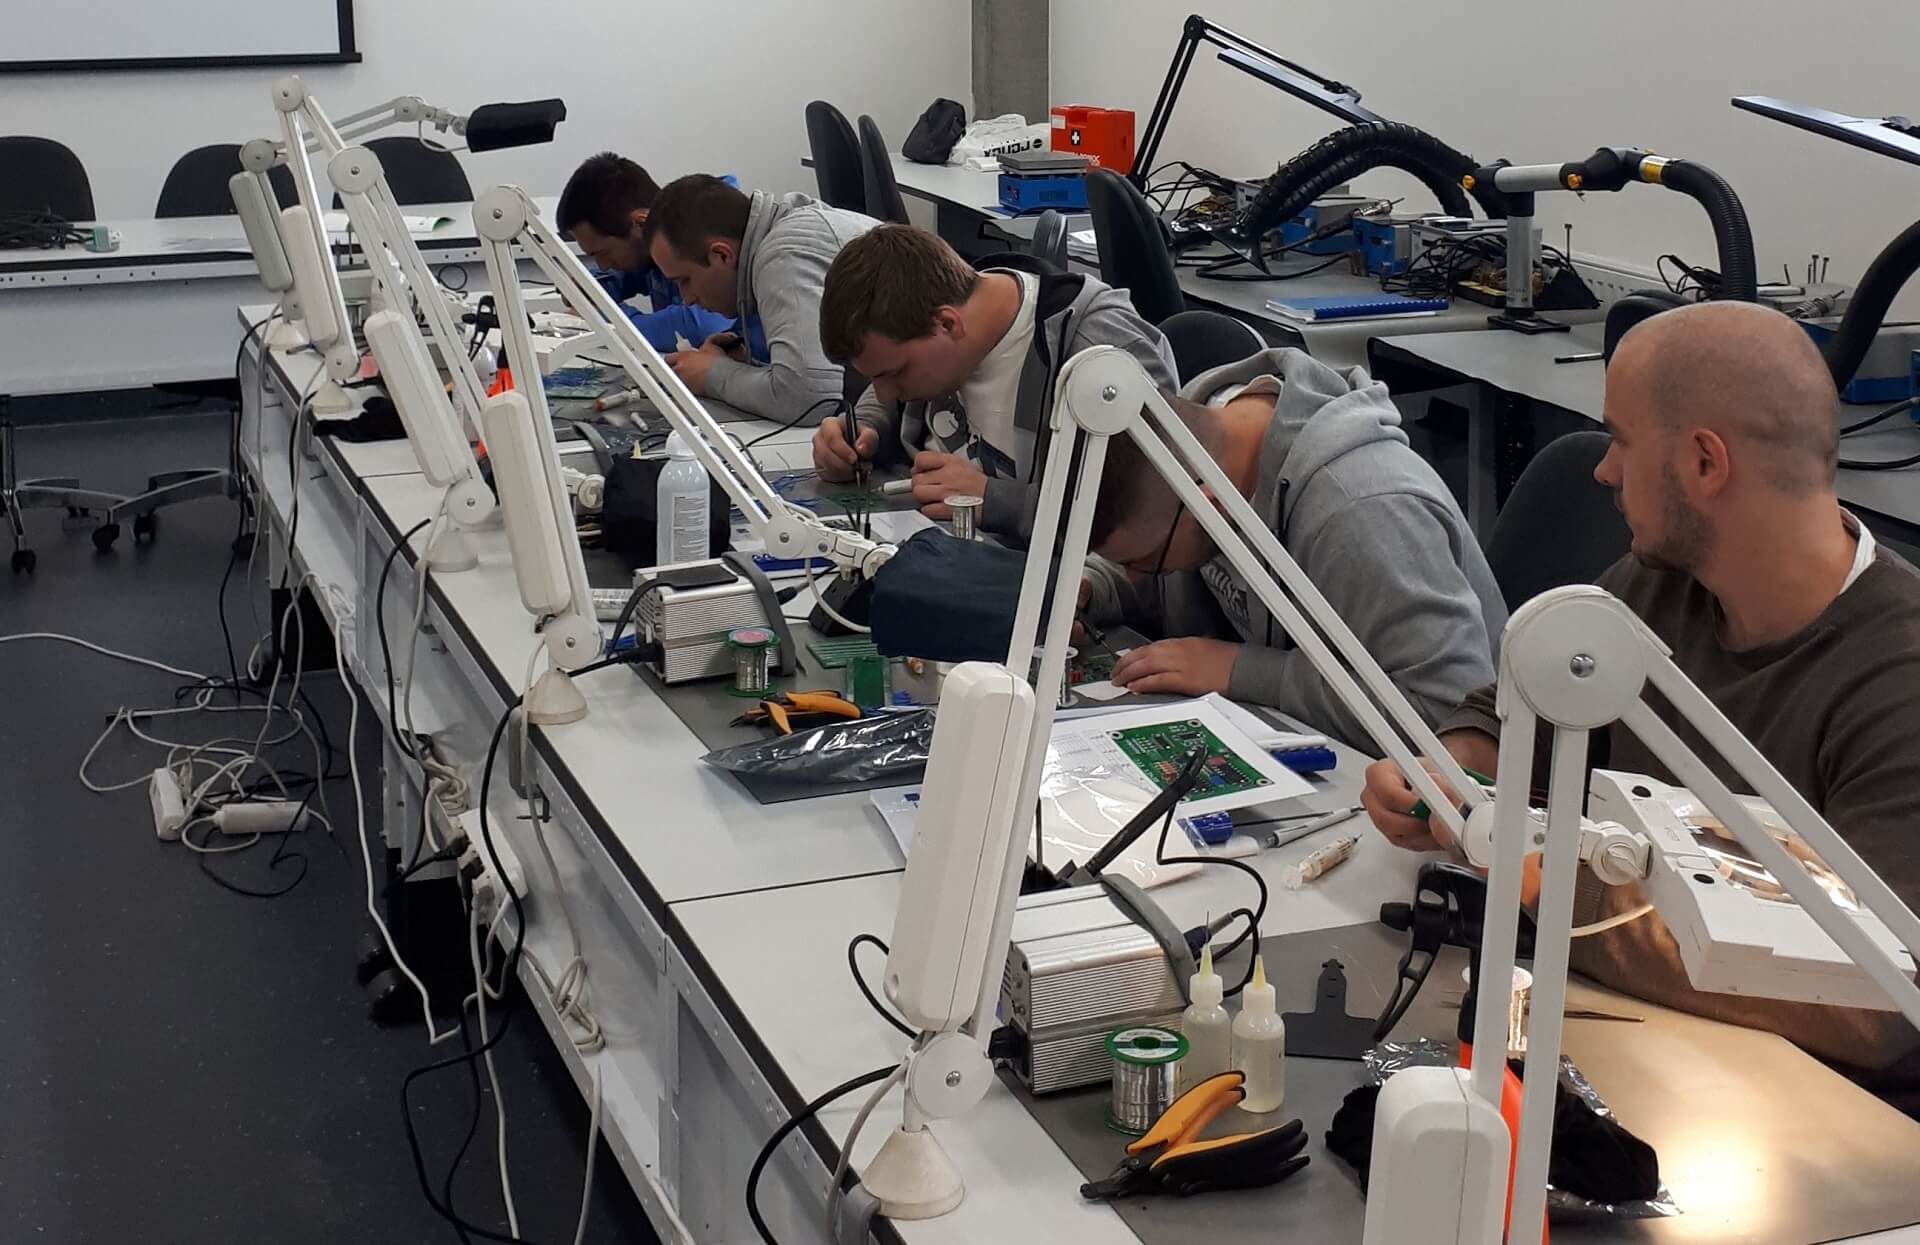 A group of students are working at the engineering workbench